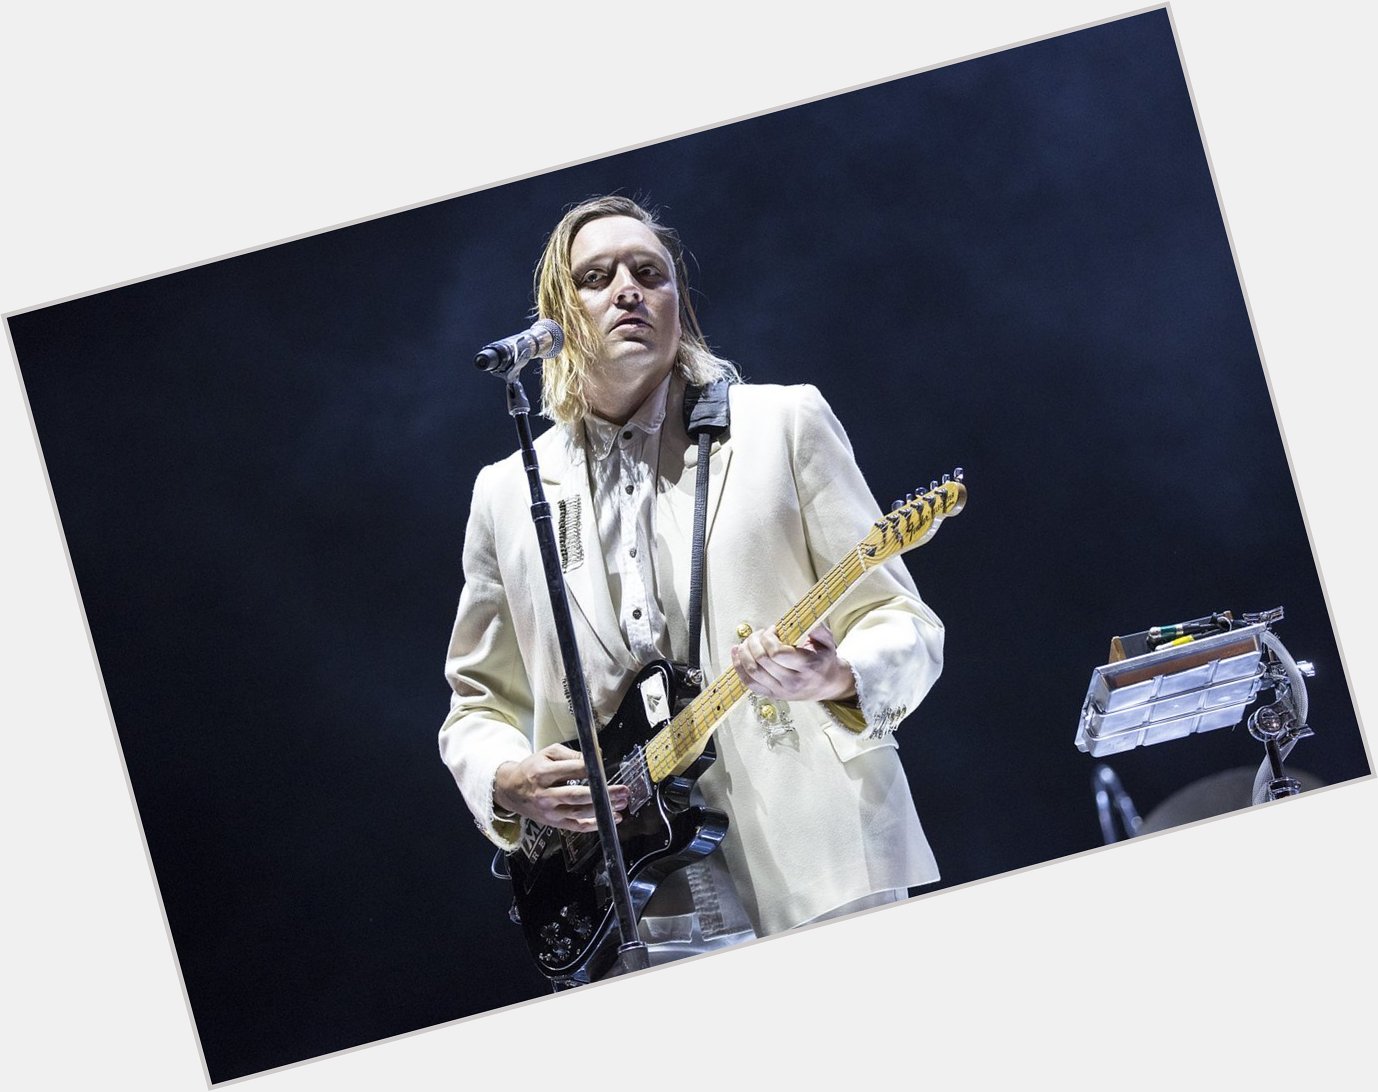 Happy 37th birthday to Win Butler of Arcade Fire!  